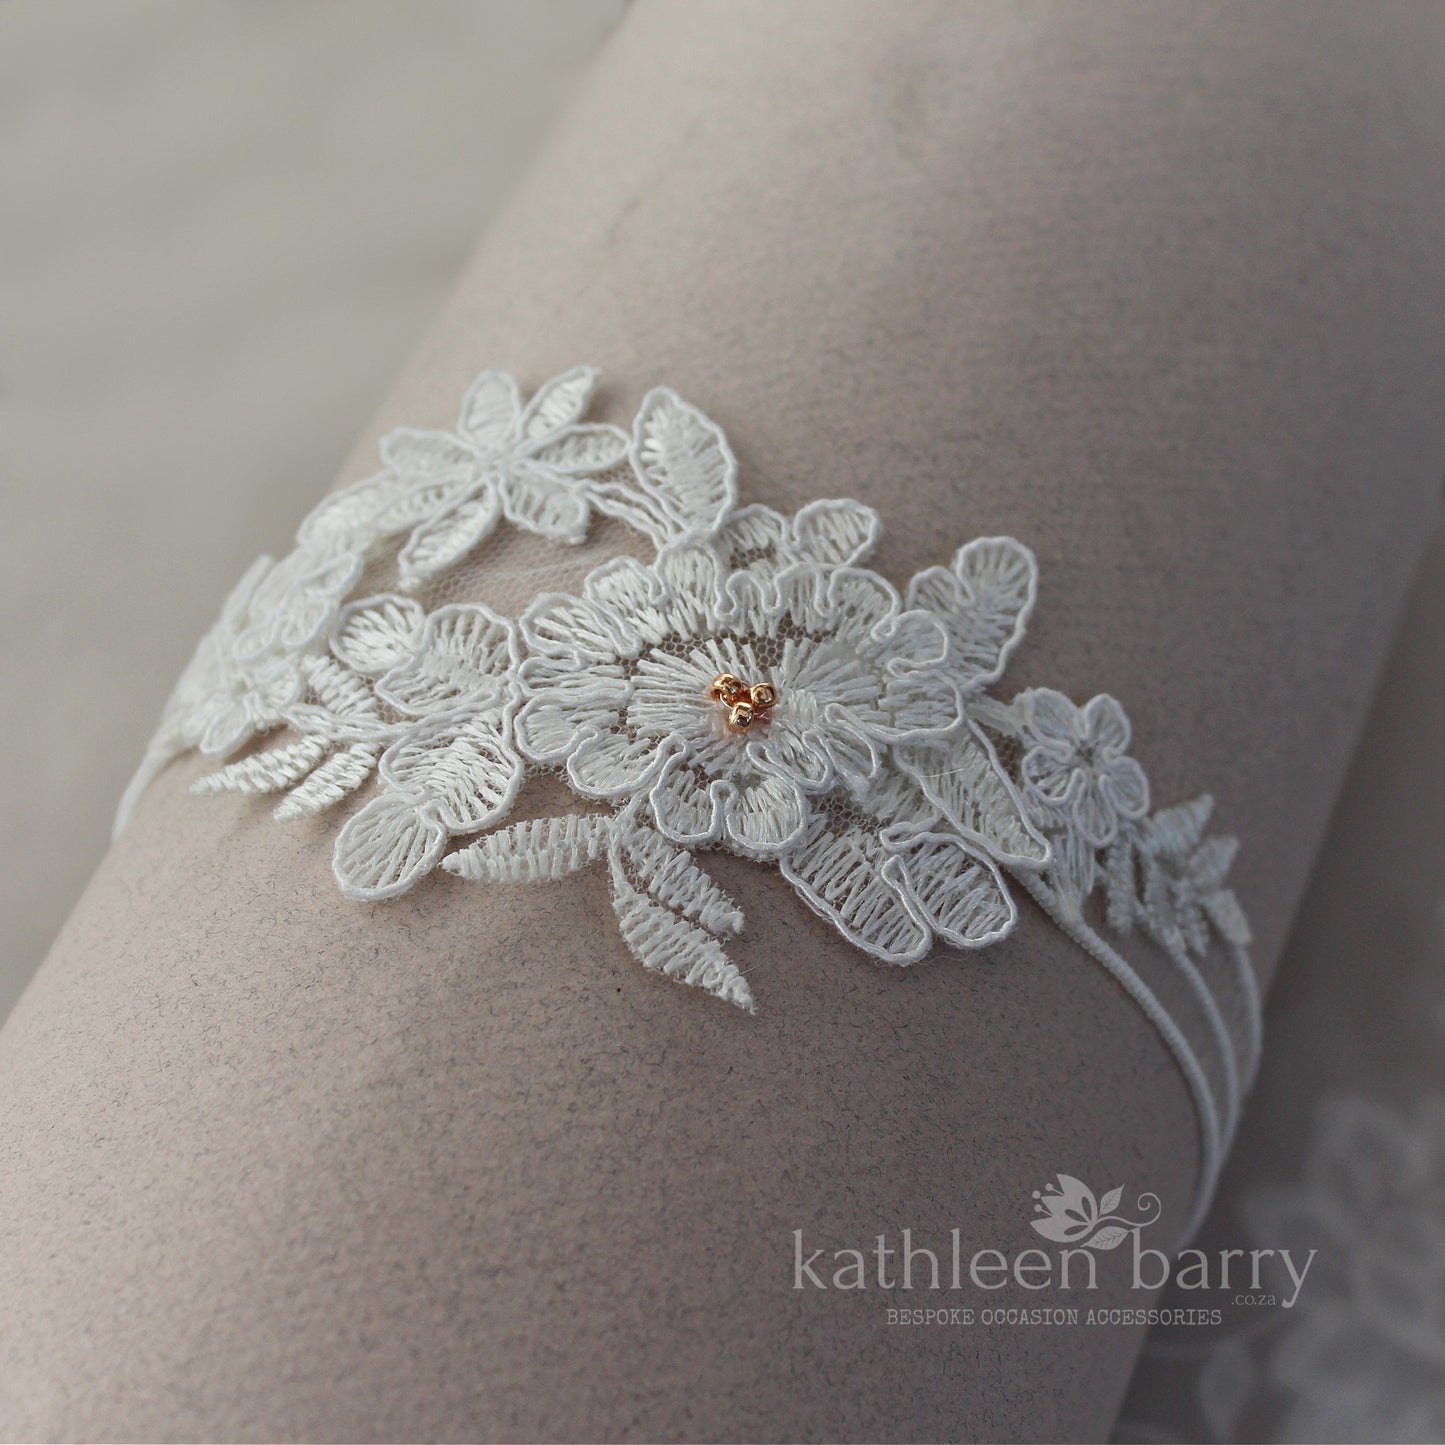 Shayna heirloom garter set (or individually) - pale ivory with Rose gold, gold or silver detail  - FROM: